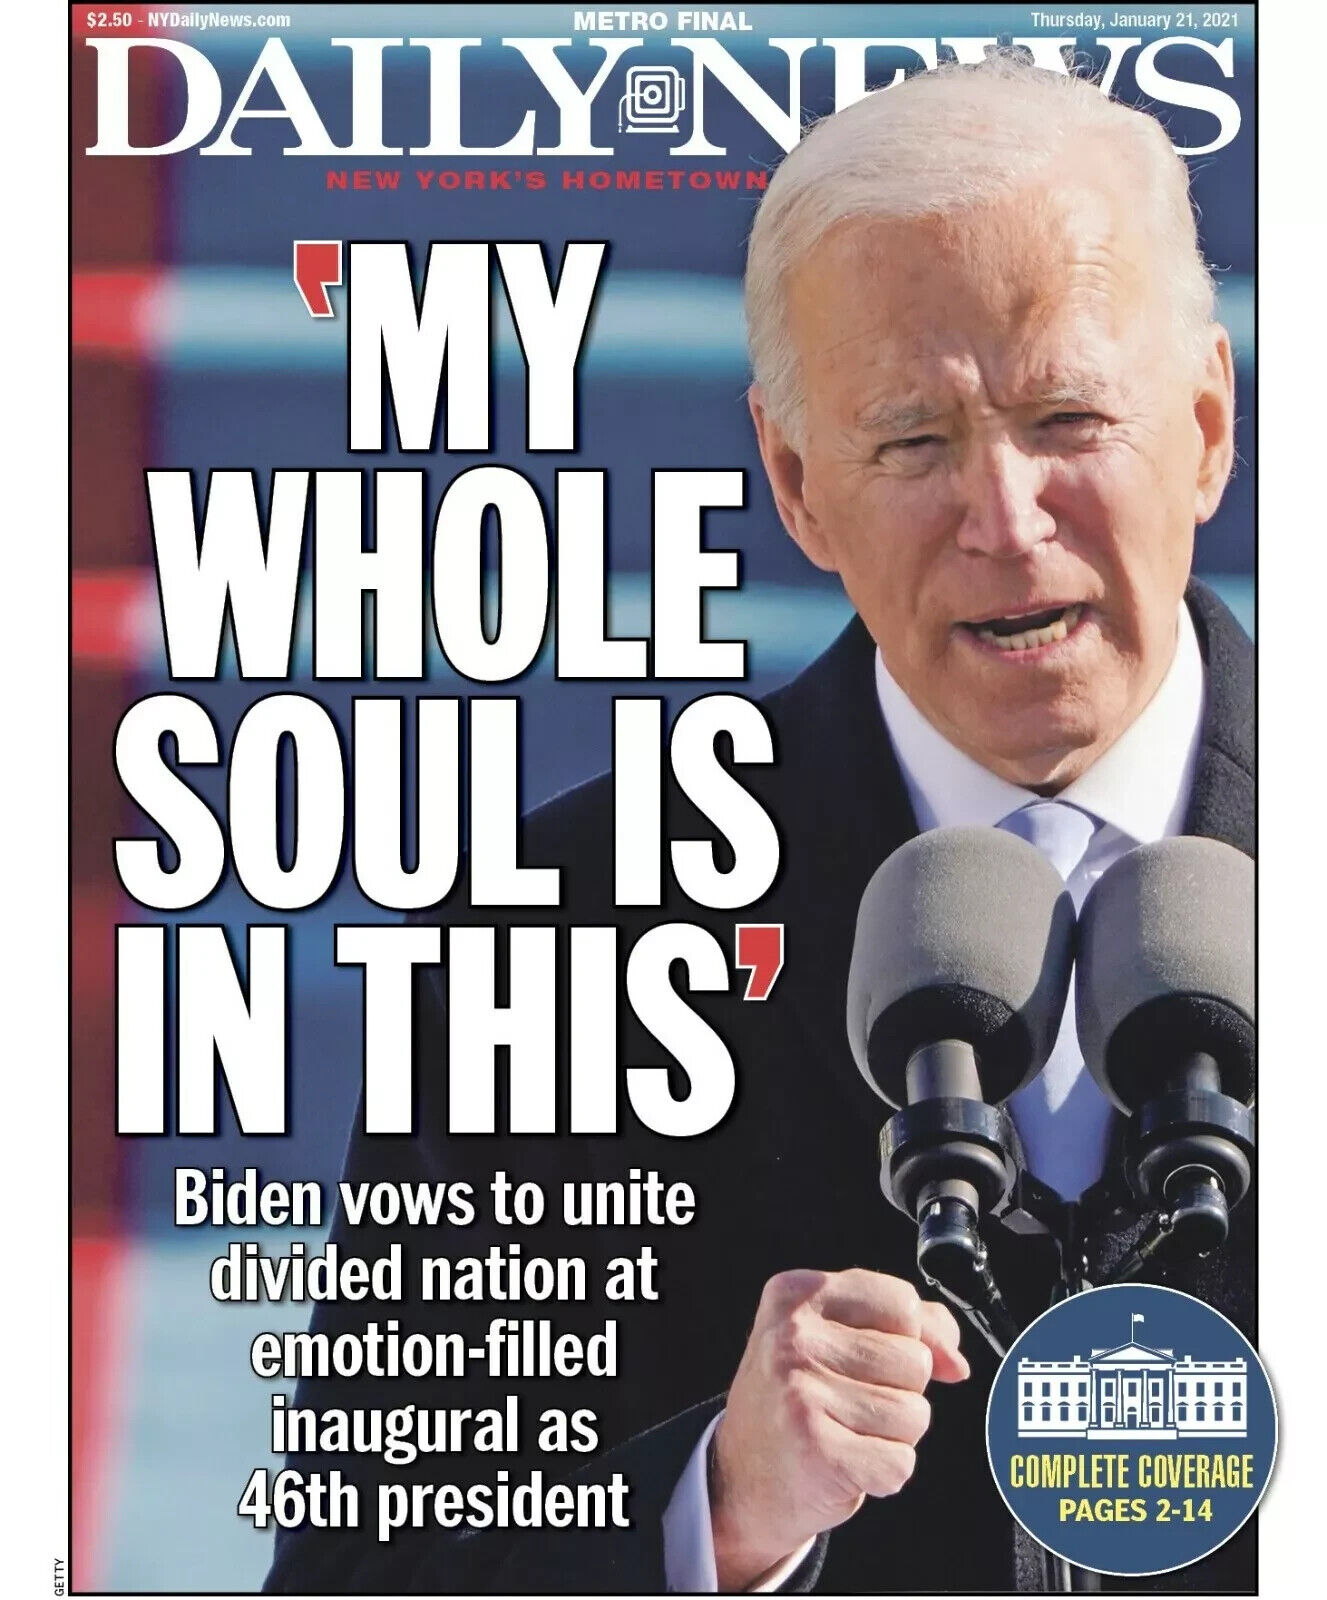 NEW YORK DAILY NEWS NEWSPAPER \'MY WHOLE SOUL IS IN THIS - 1/21